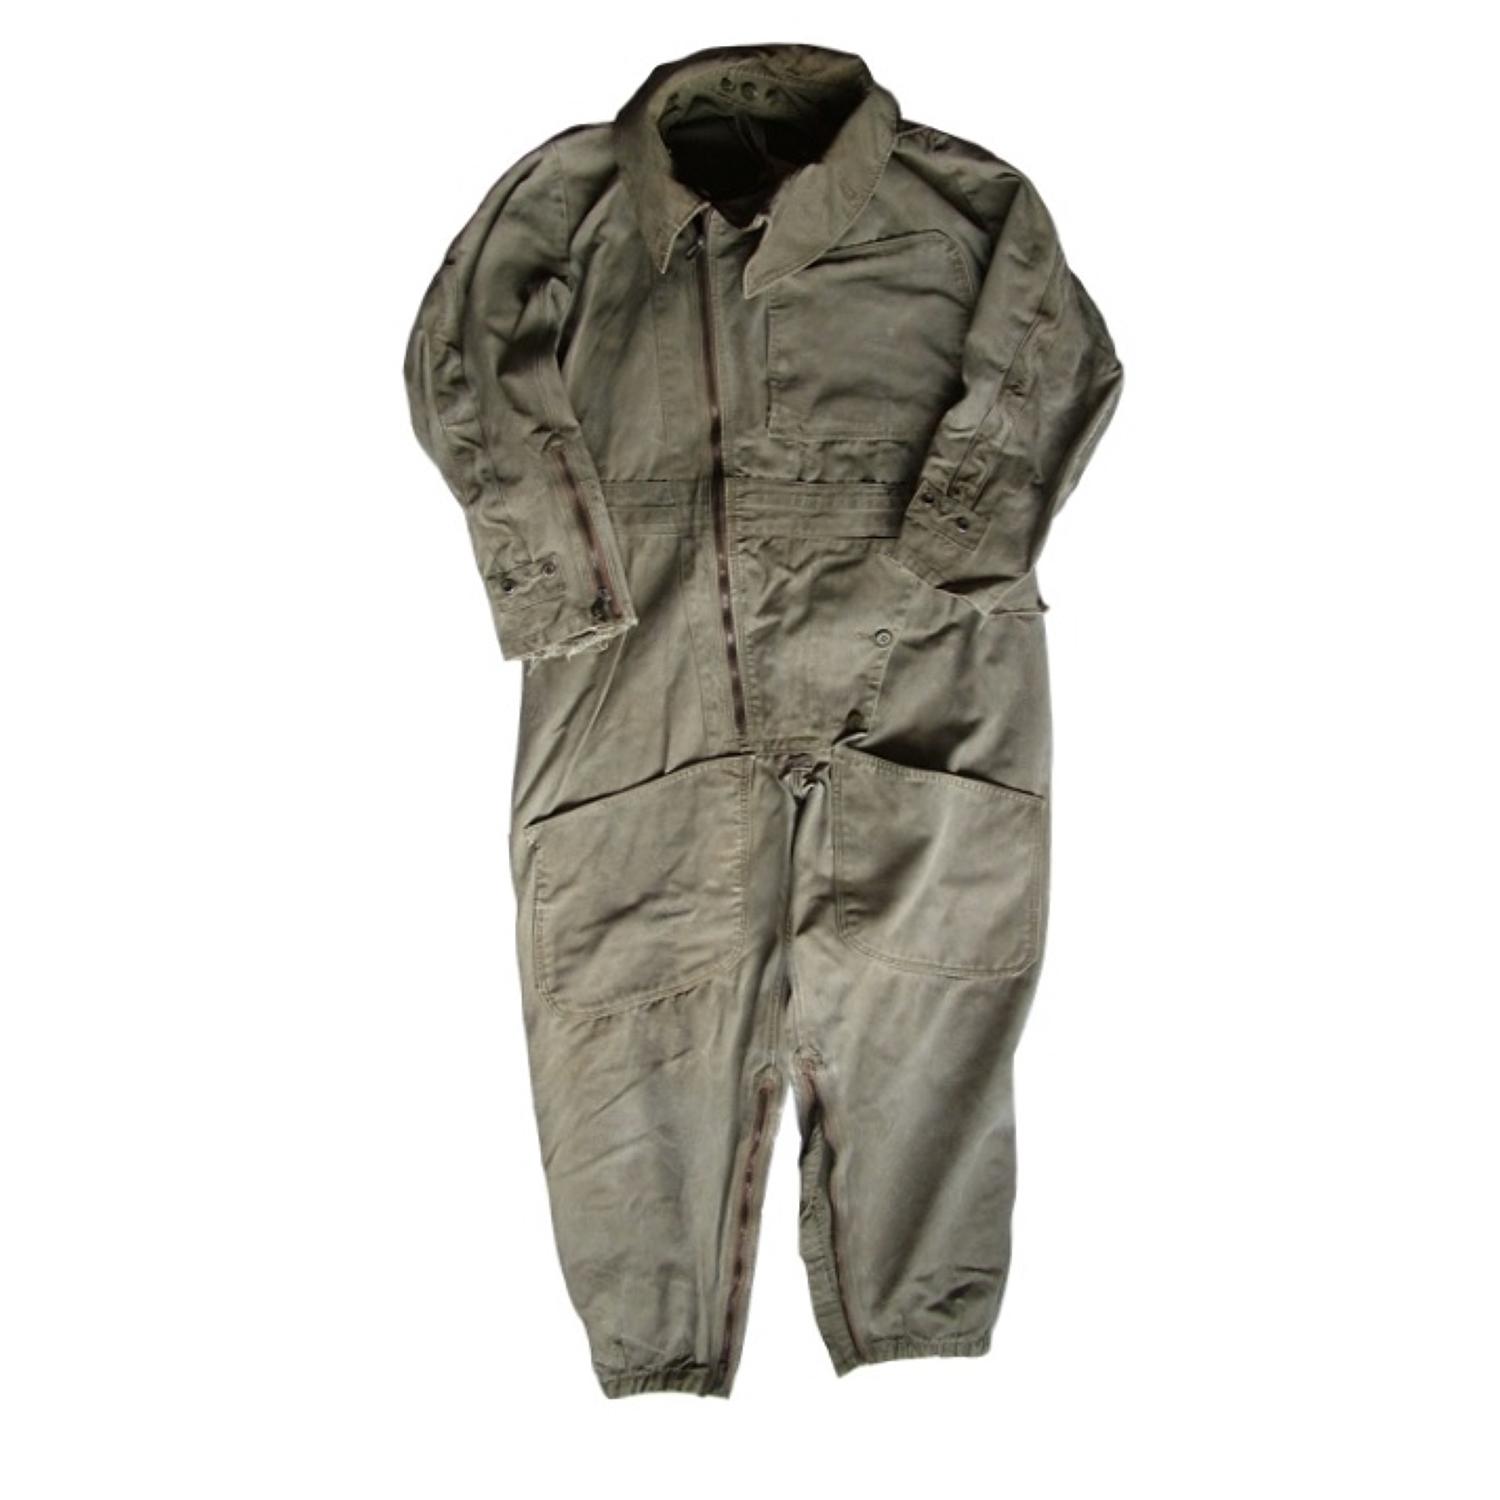 RAF 1941 pattern Sidcot flying suit